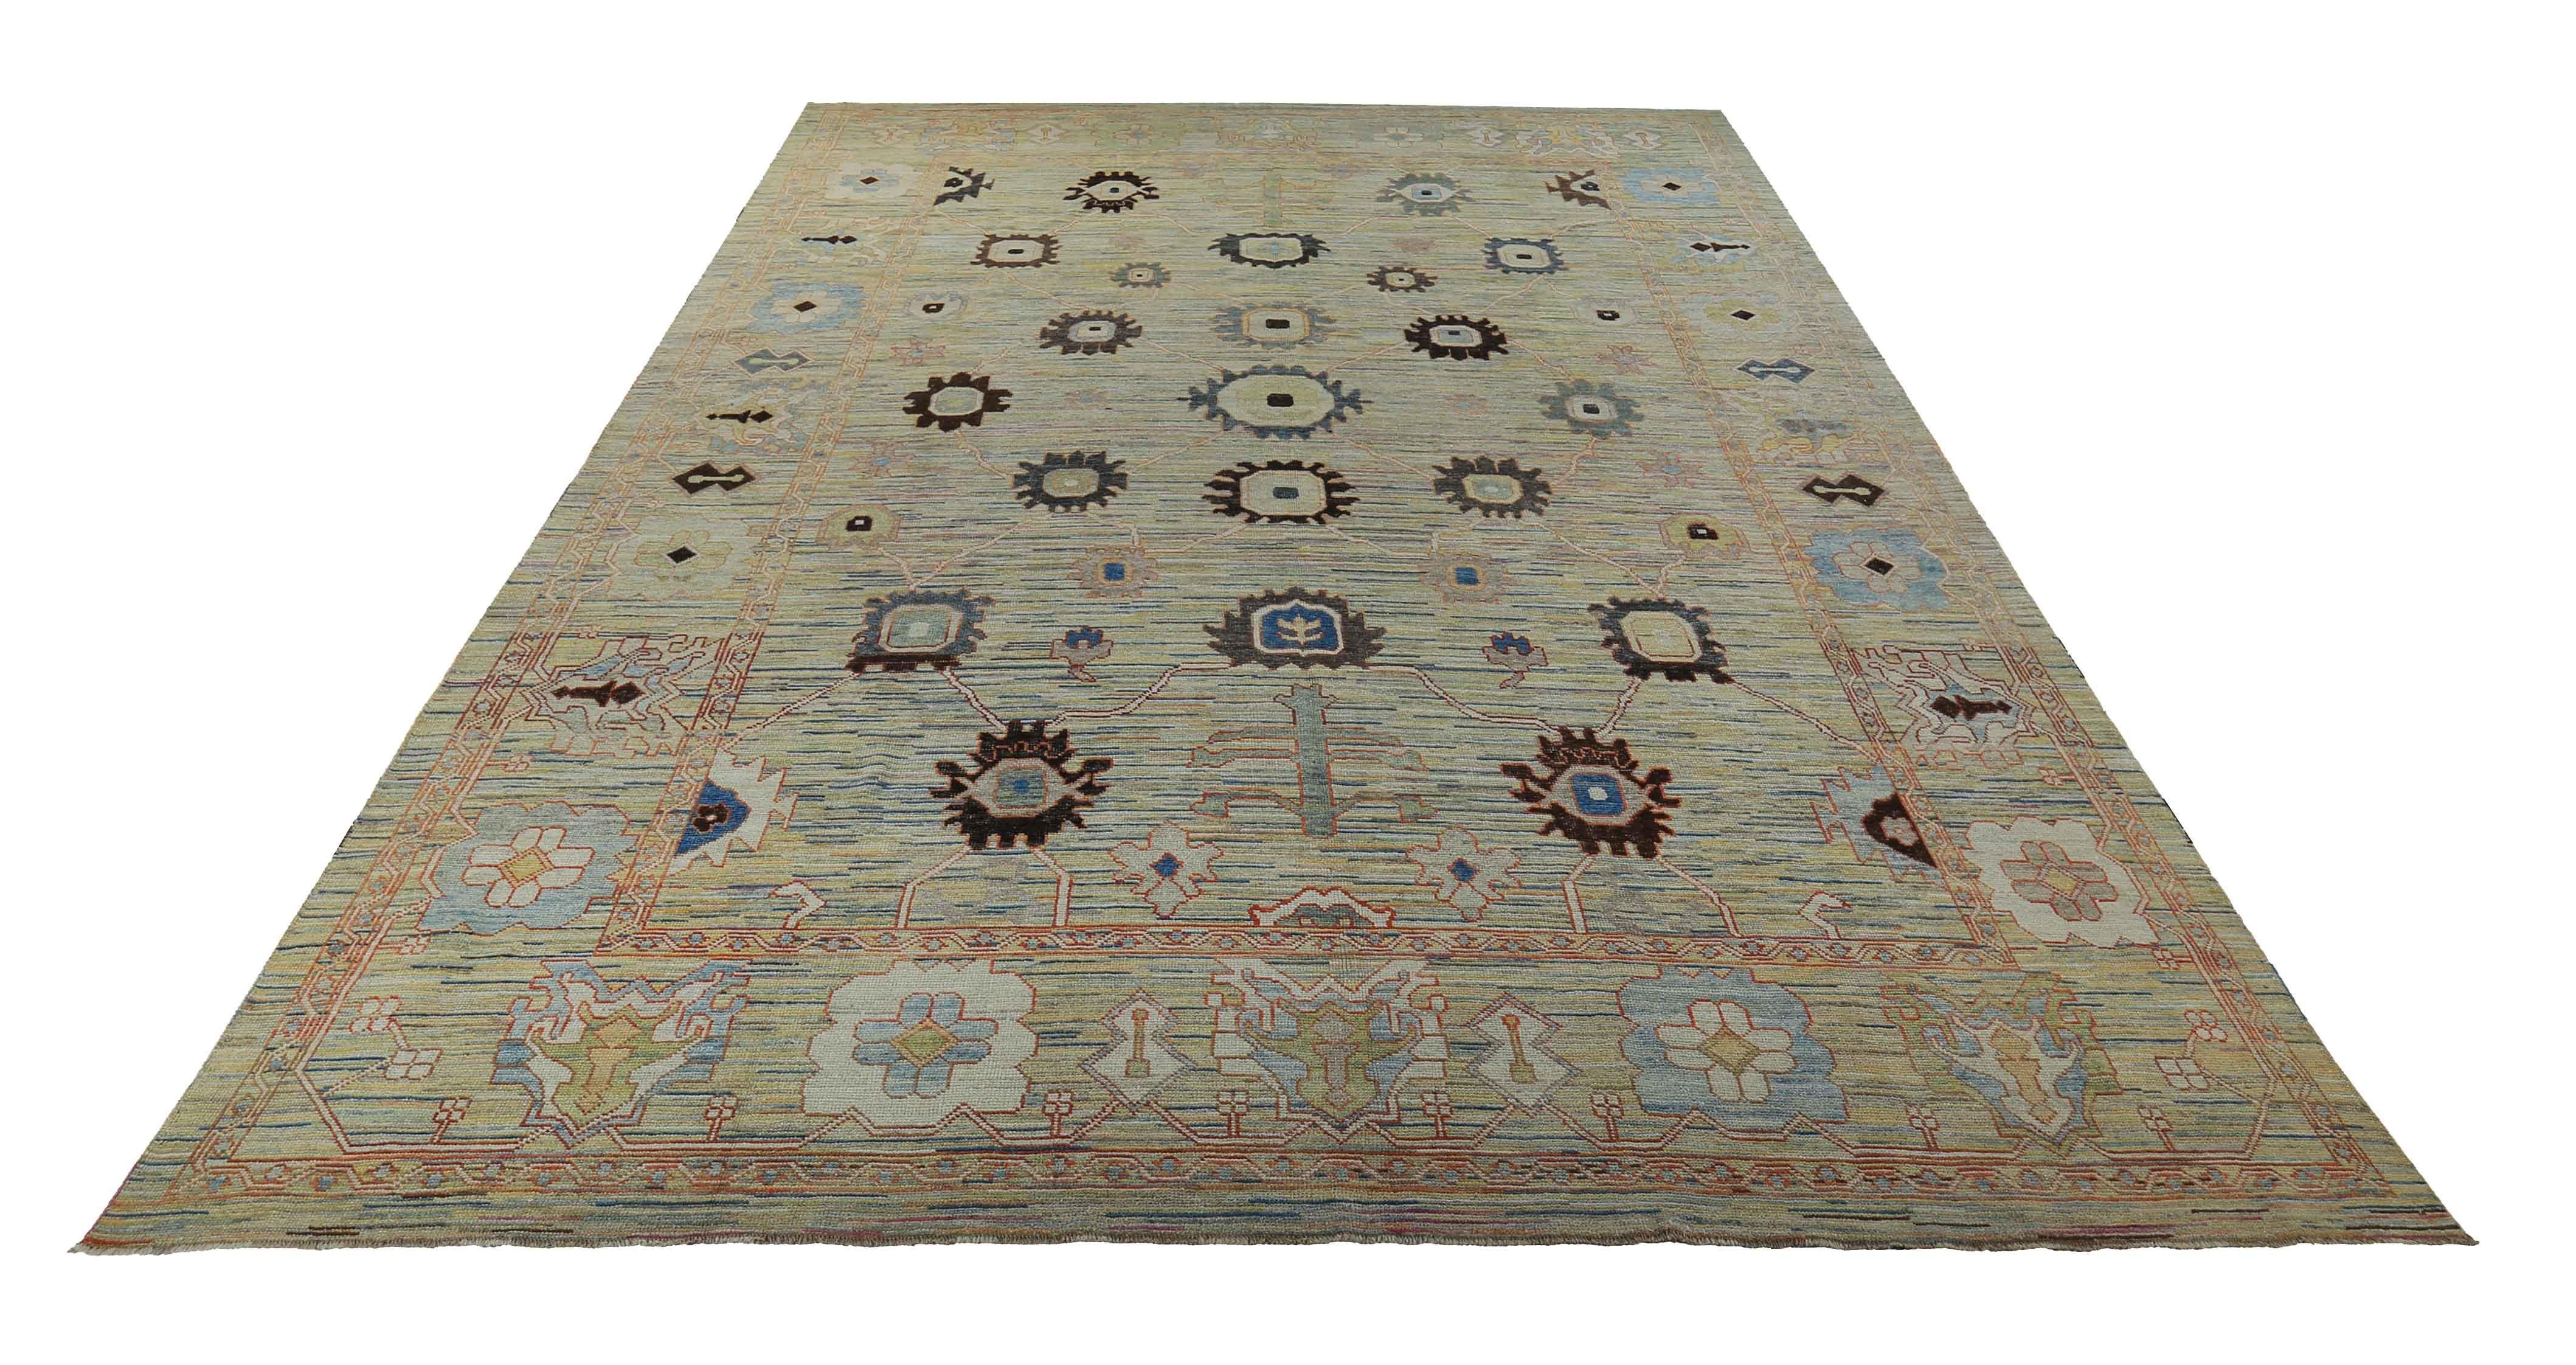 New Turkish rug made of handwoven sheep’s wool of the finest quality. It’s colored with organic vegetable dyes that are certified safe for humans and pets alike. It features brown and blue floral heads on a yellow field. Flower patterns are commonly